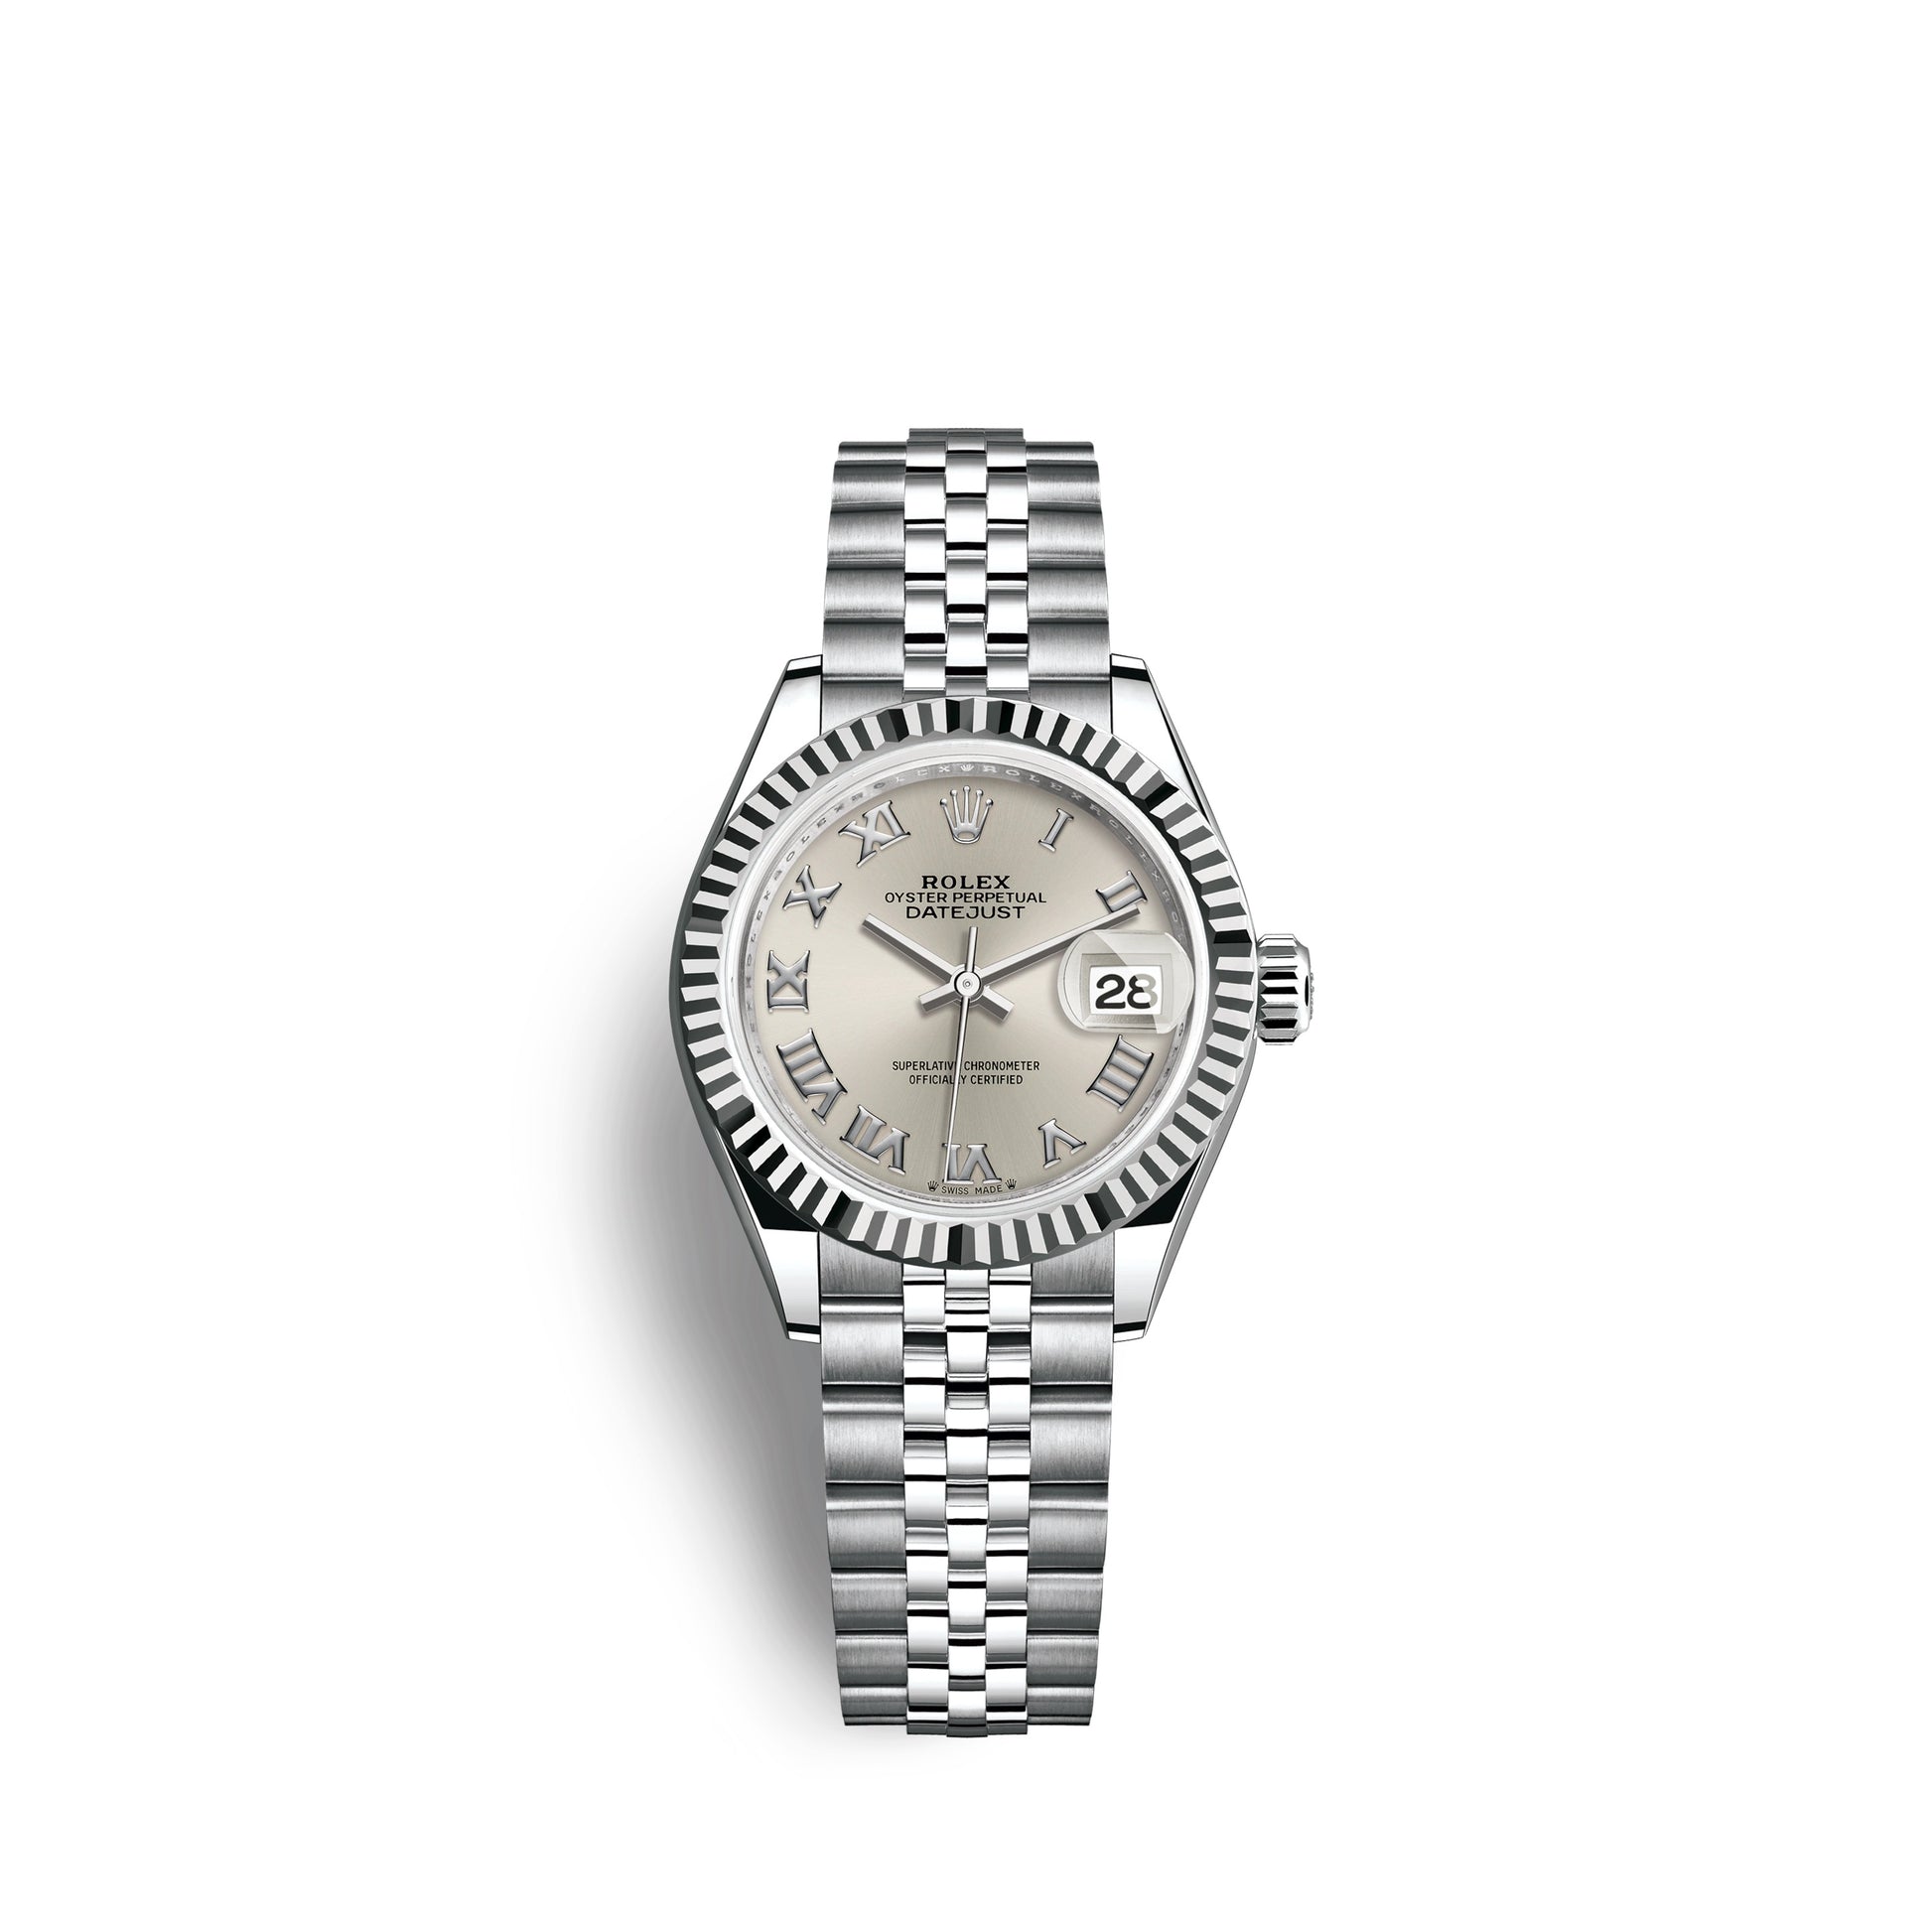 Rolex Lady-Datejust 28, Oystersteel and 18k White Gold, Ref# 279174-0007